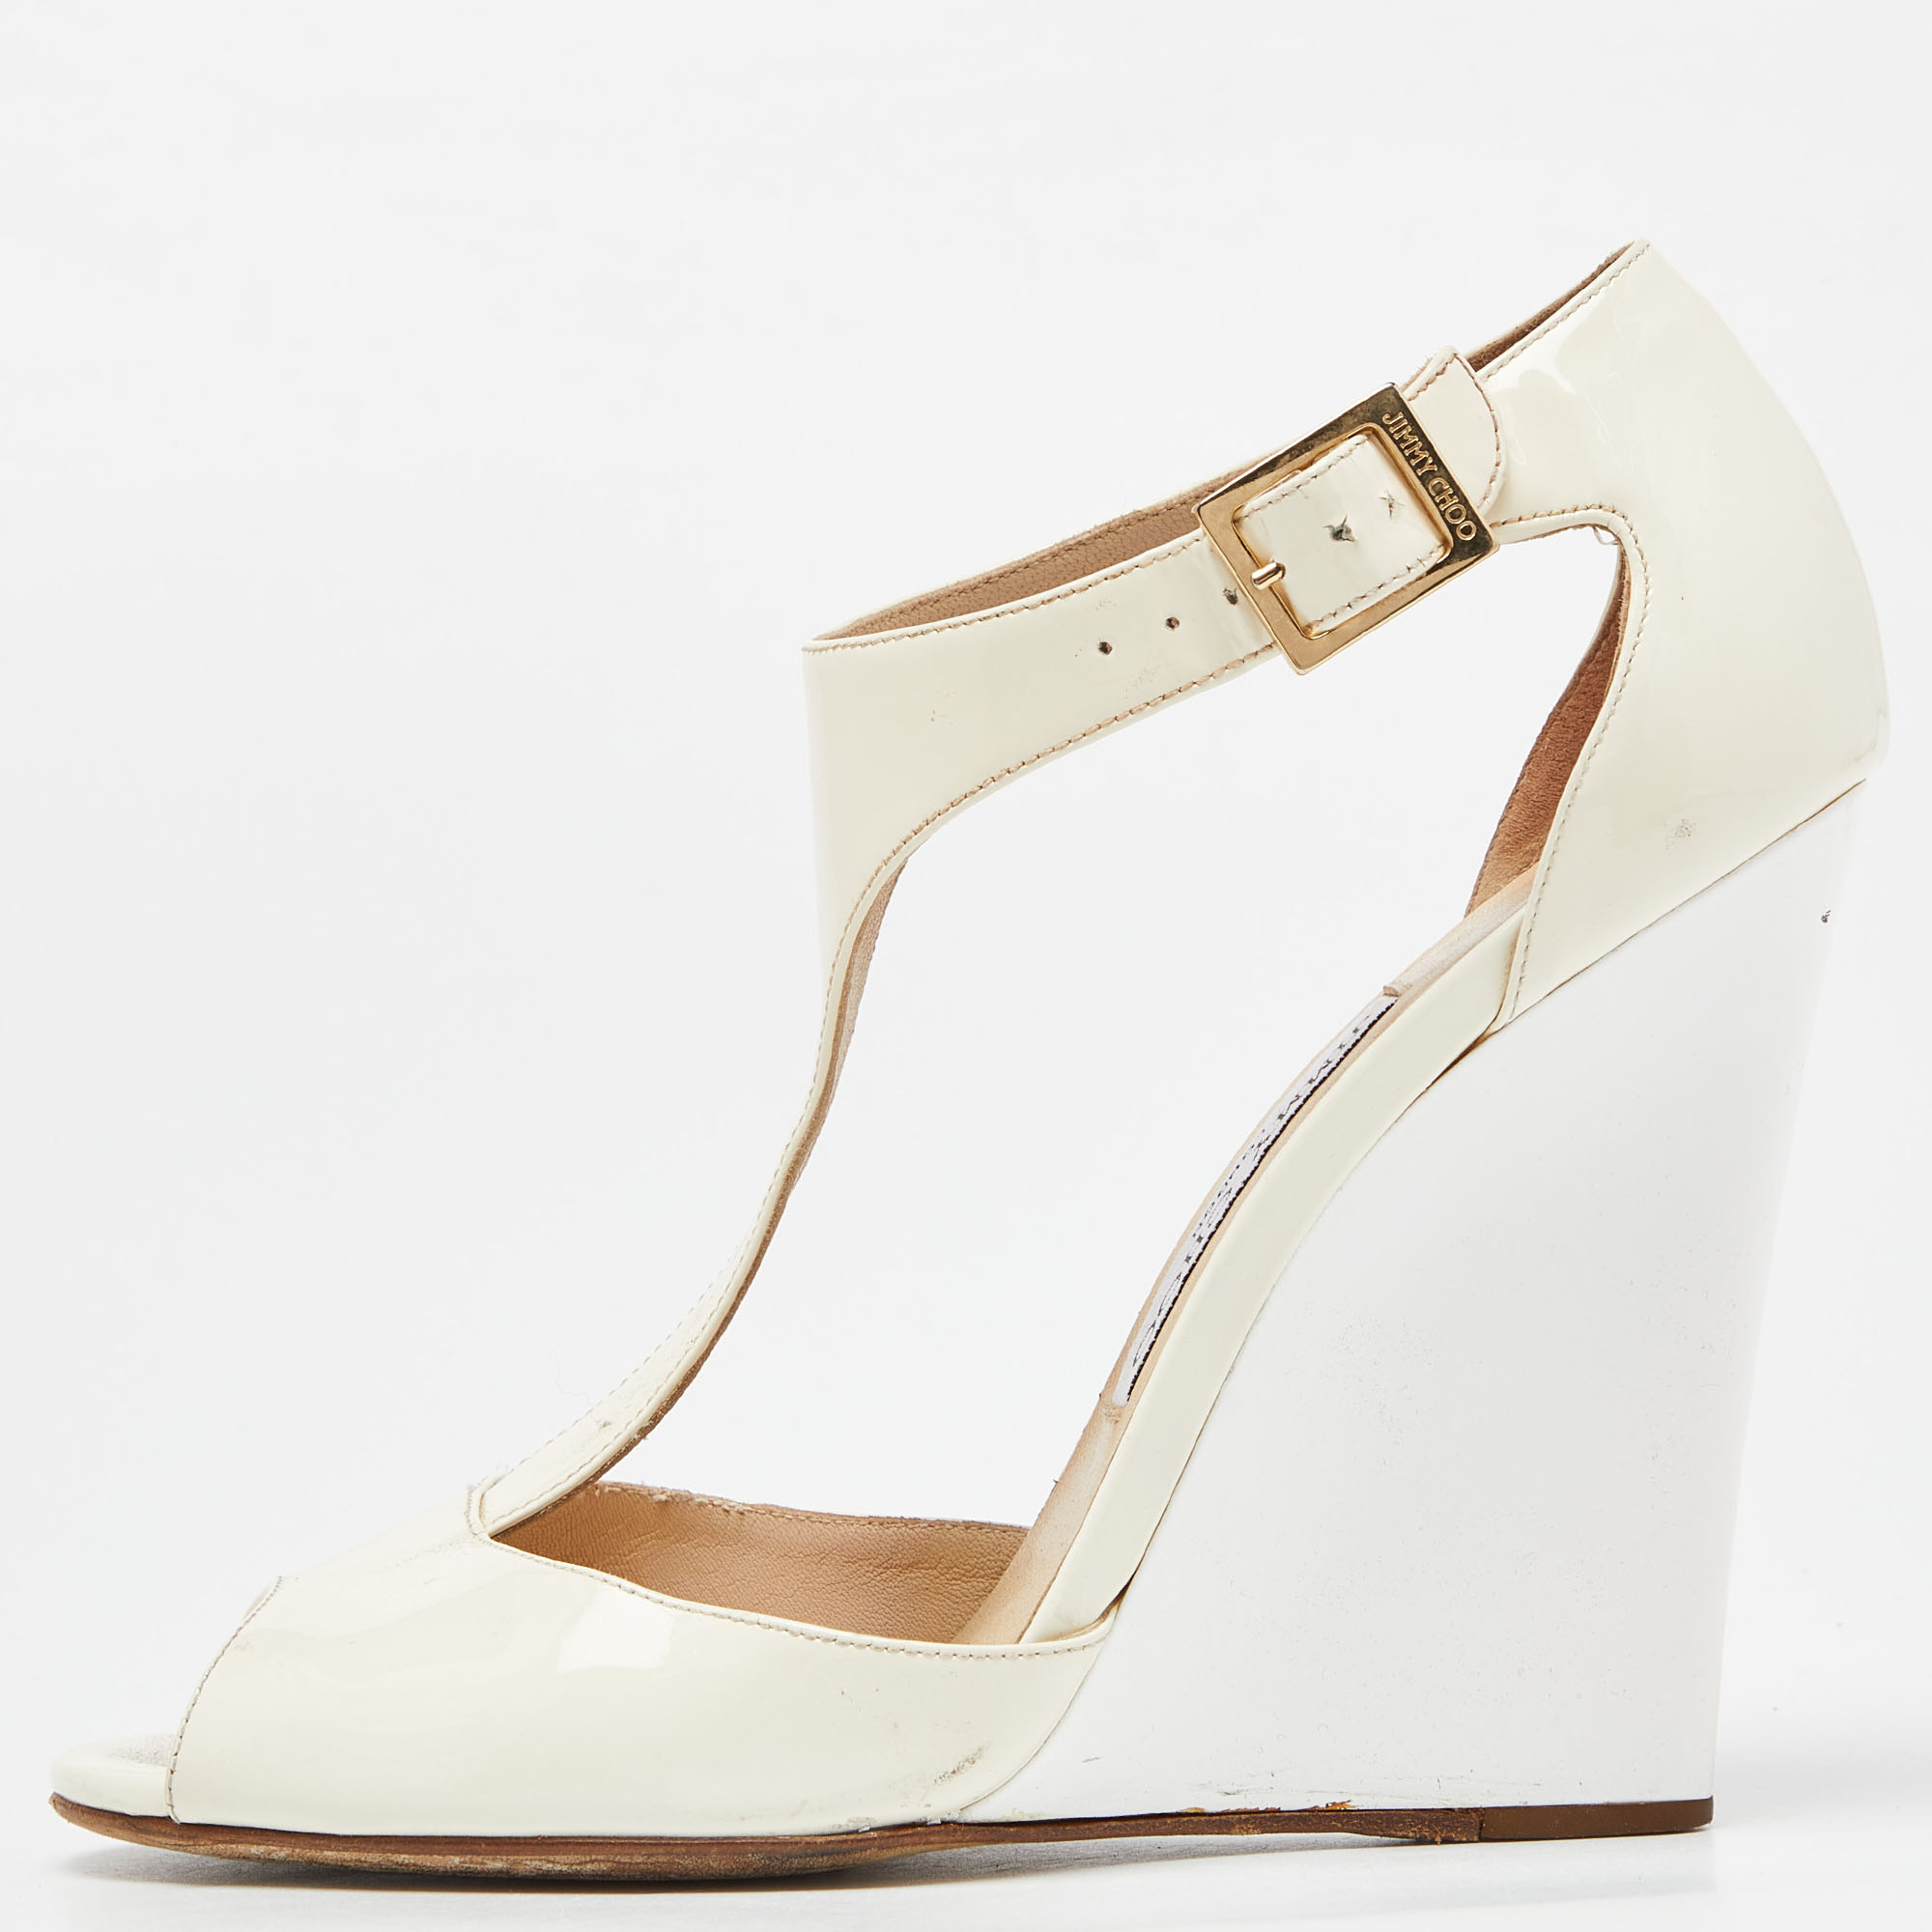 Jimmy choo white/cream patent leather token t strap wedges size 38.5